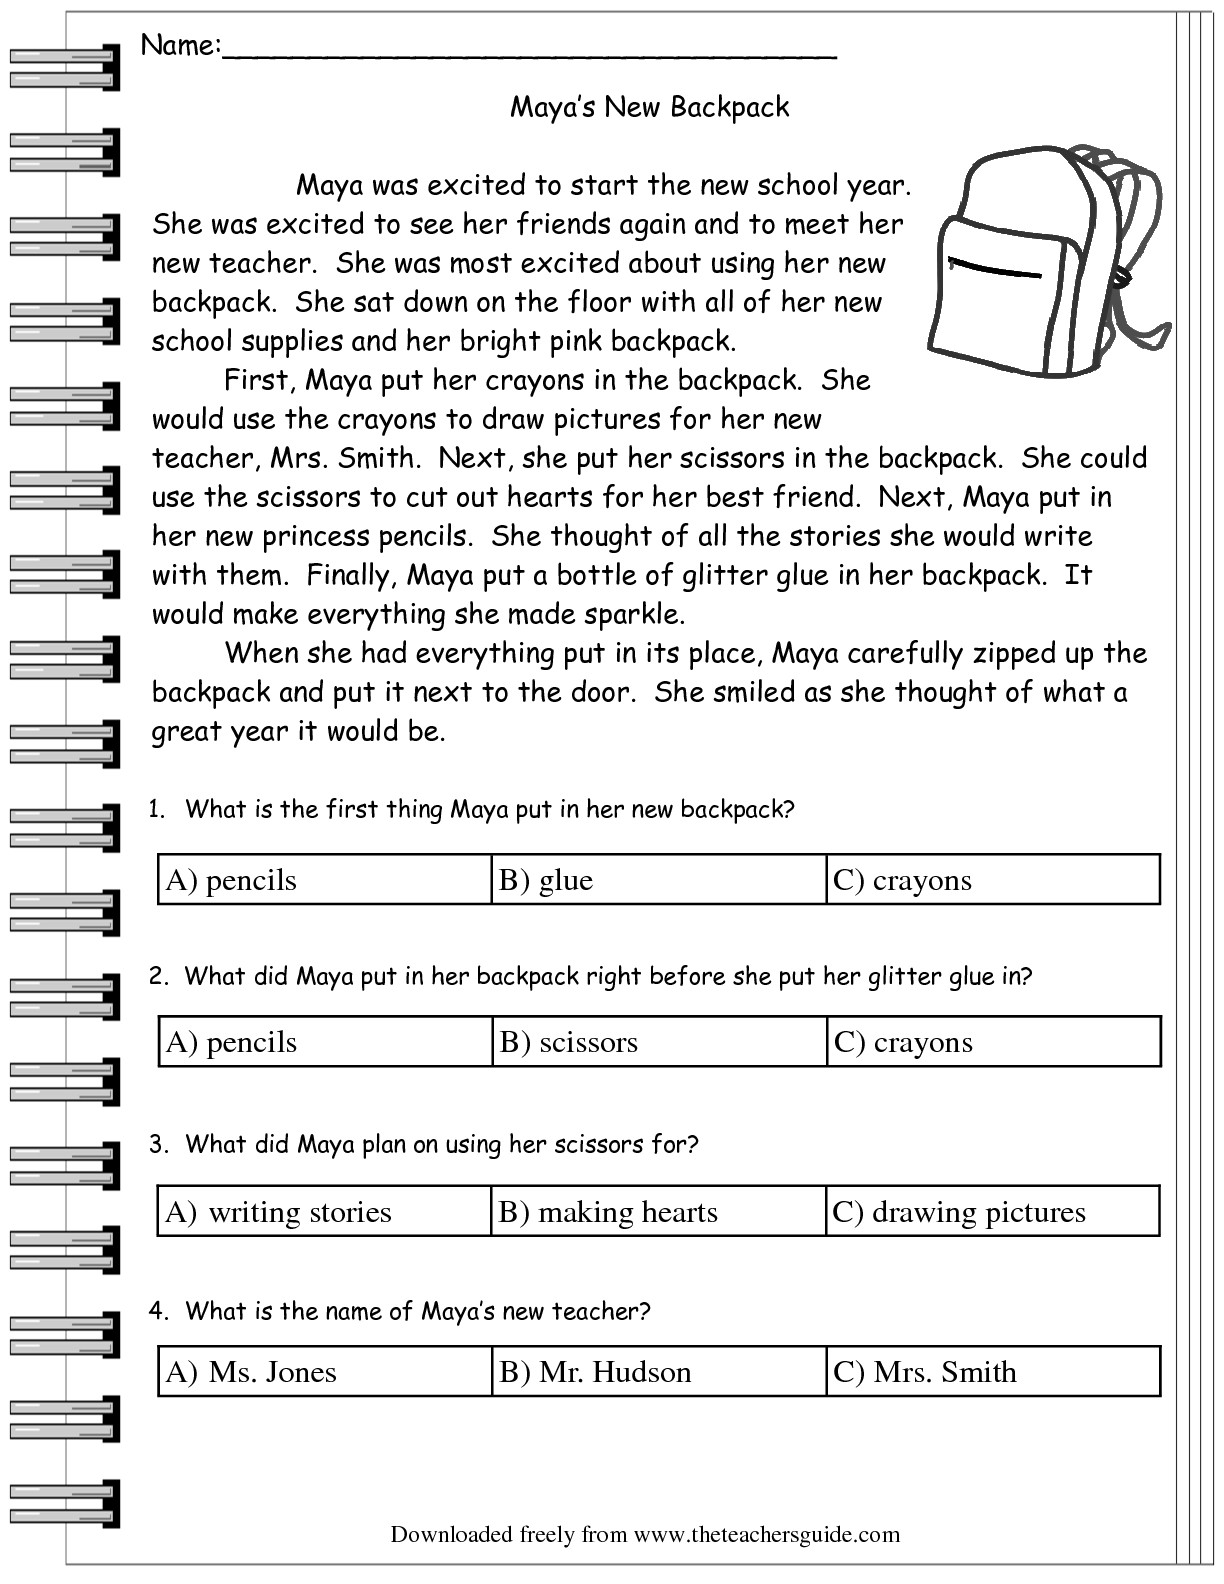 7 Best Images of Multiple Choice Worksheets For 2nd Grade